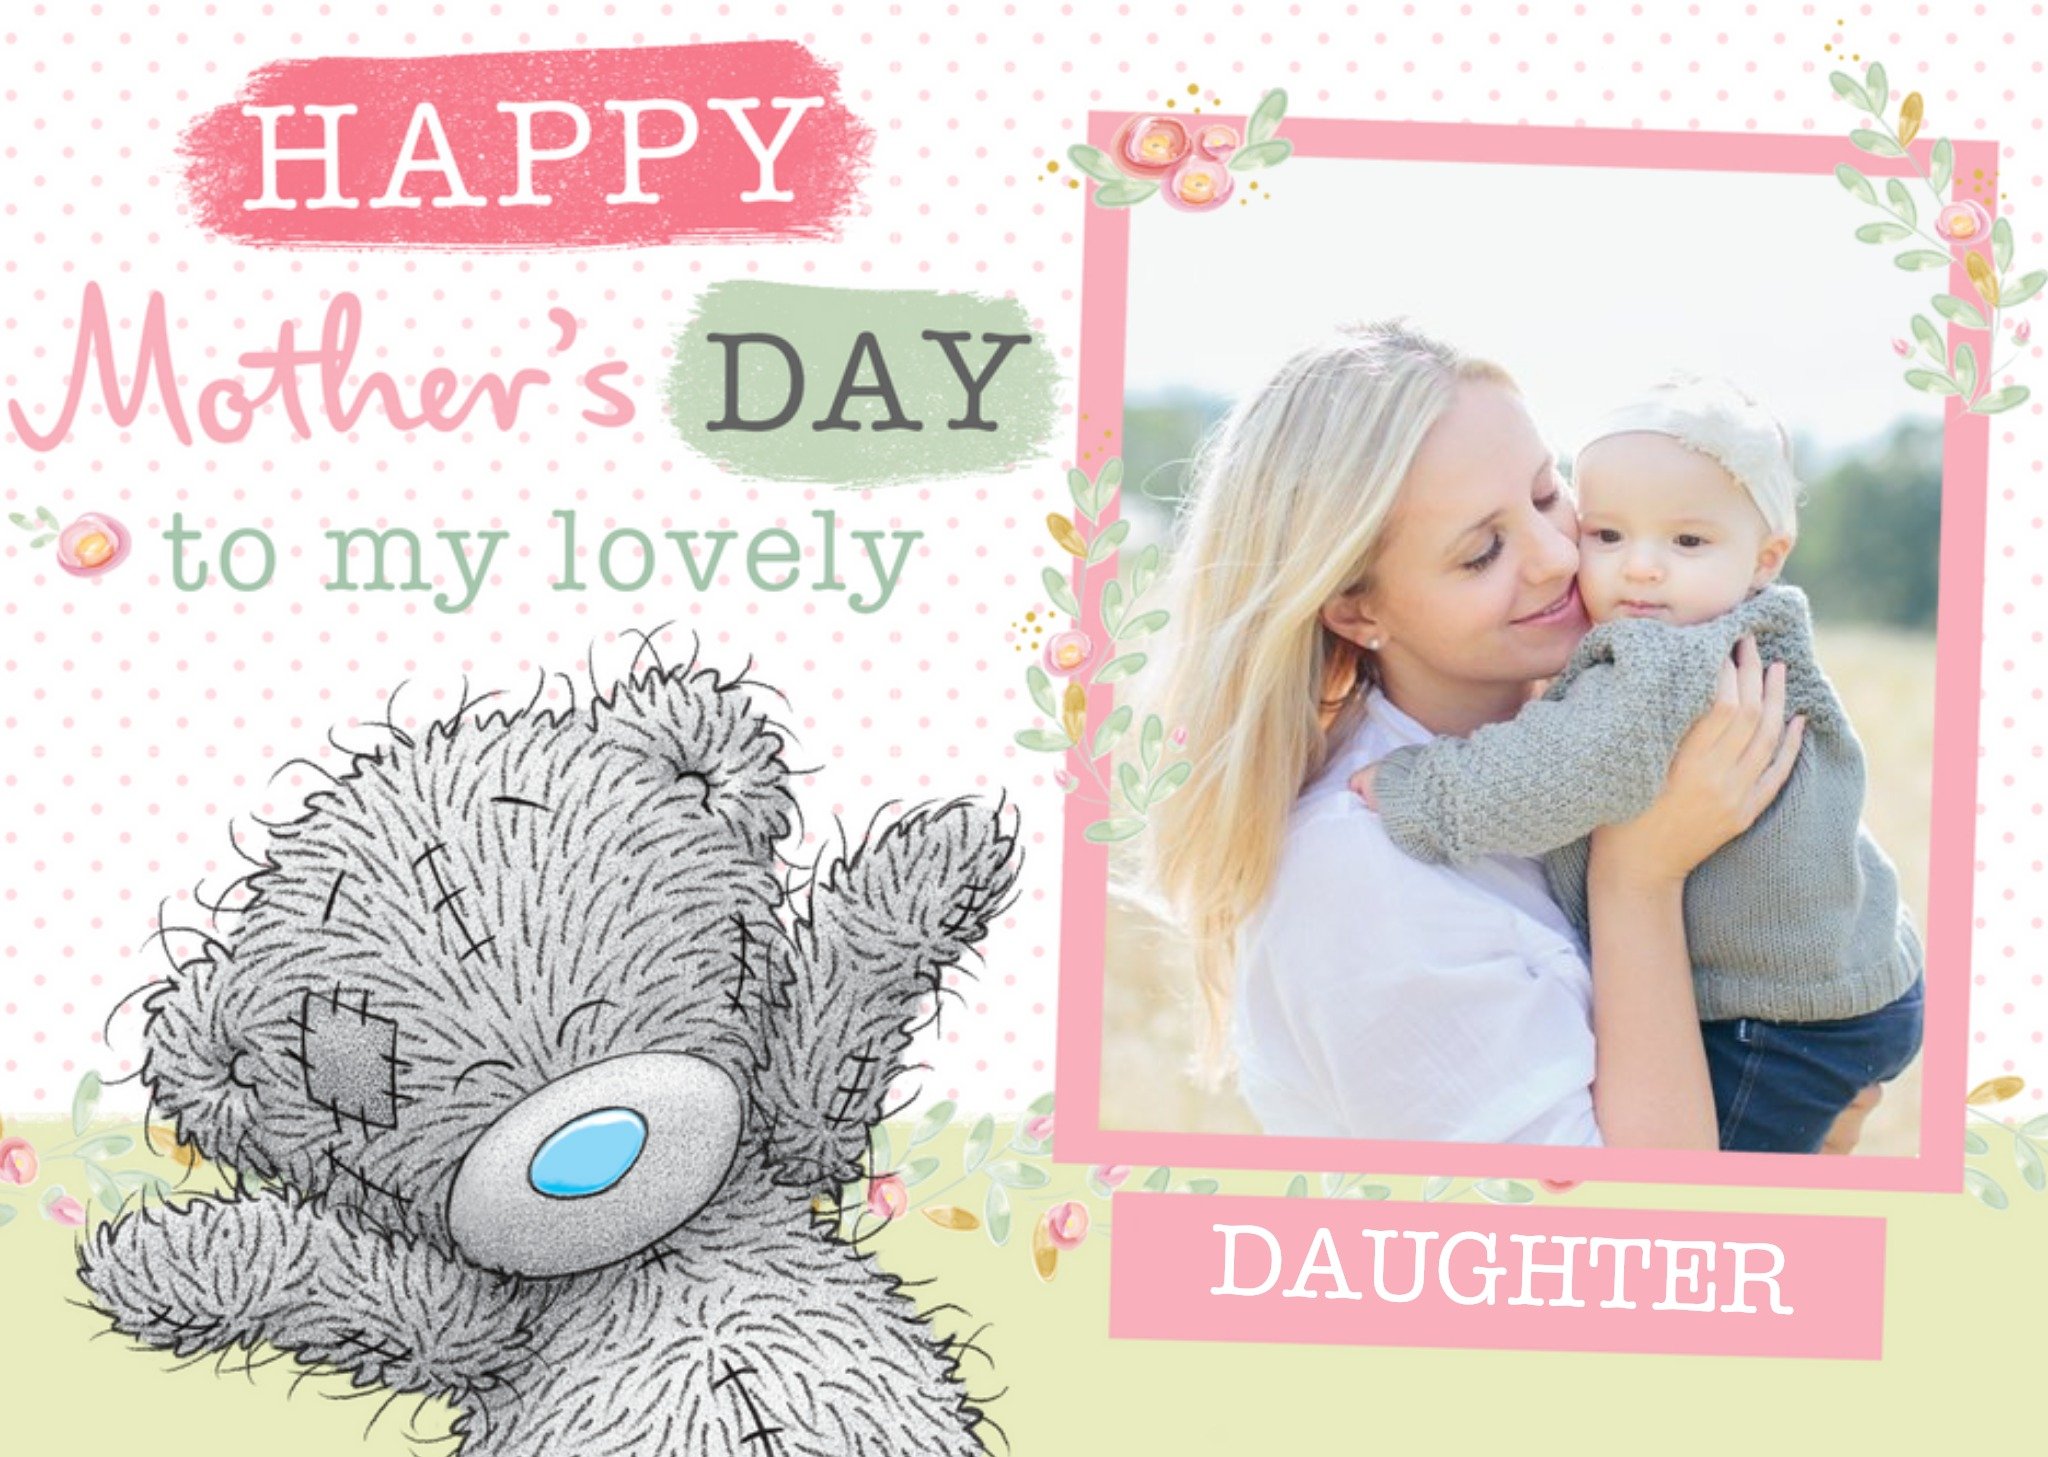 Me To You Mother's Day Card - Daughter - Tatty Teddy - Cute Photo Upload, Large